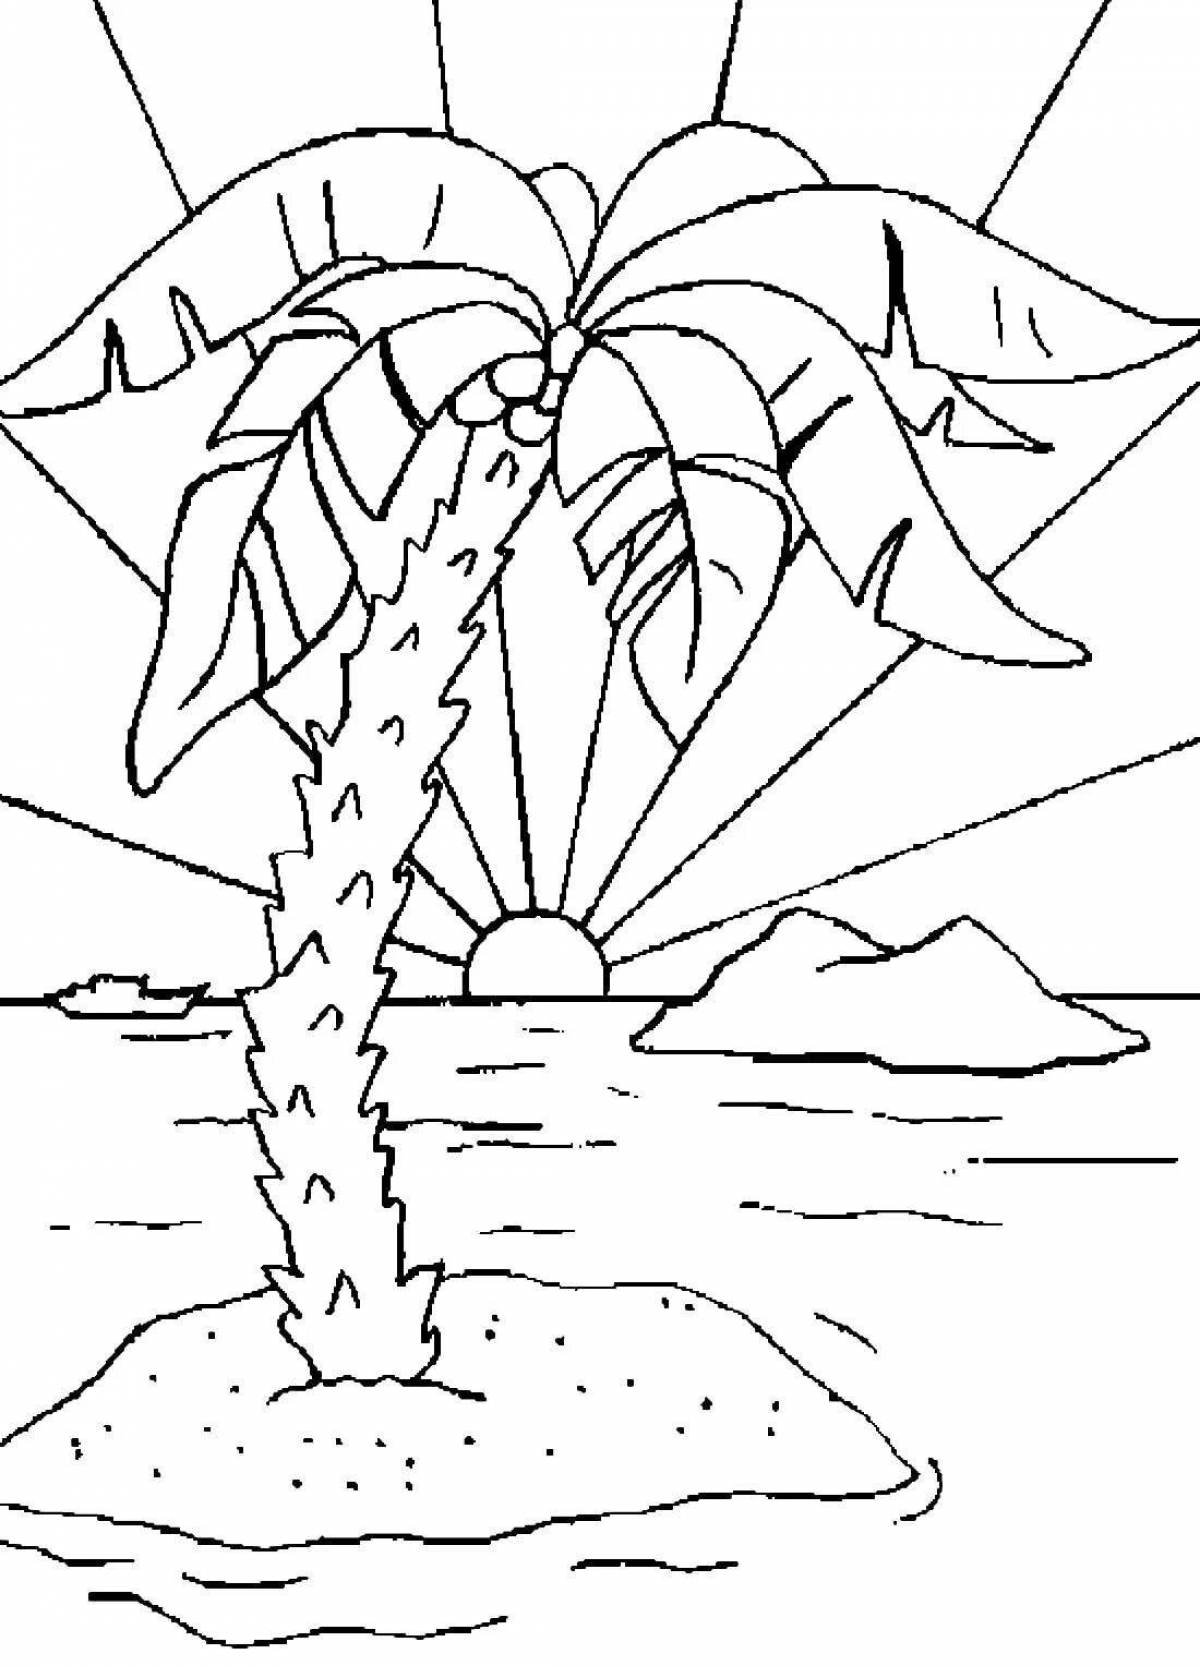 Awesome seascape coloring page